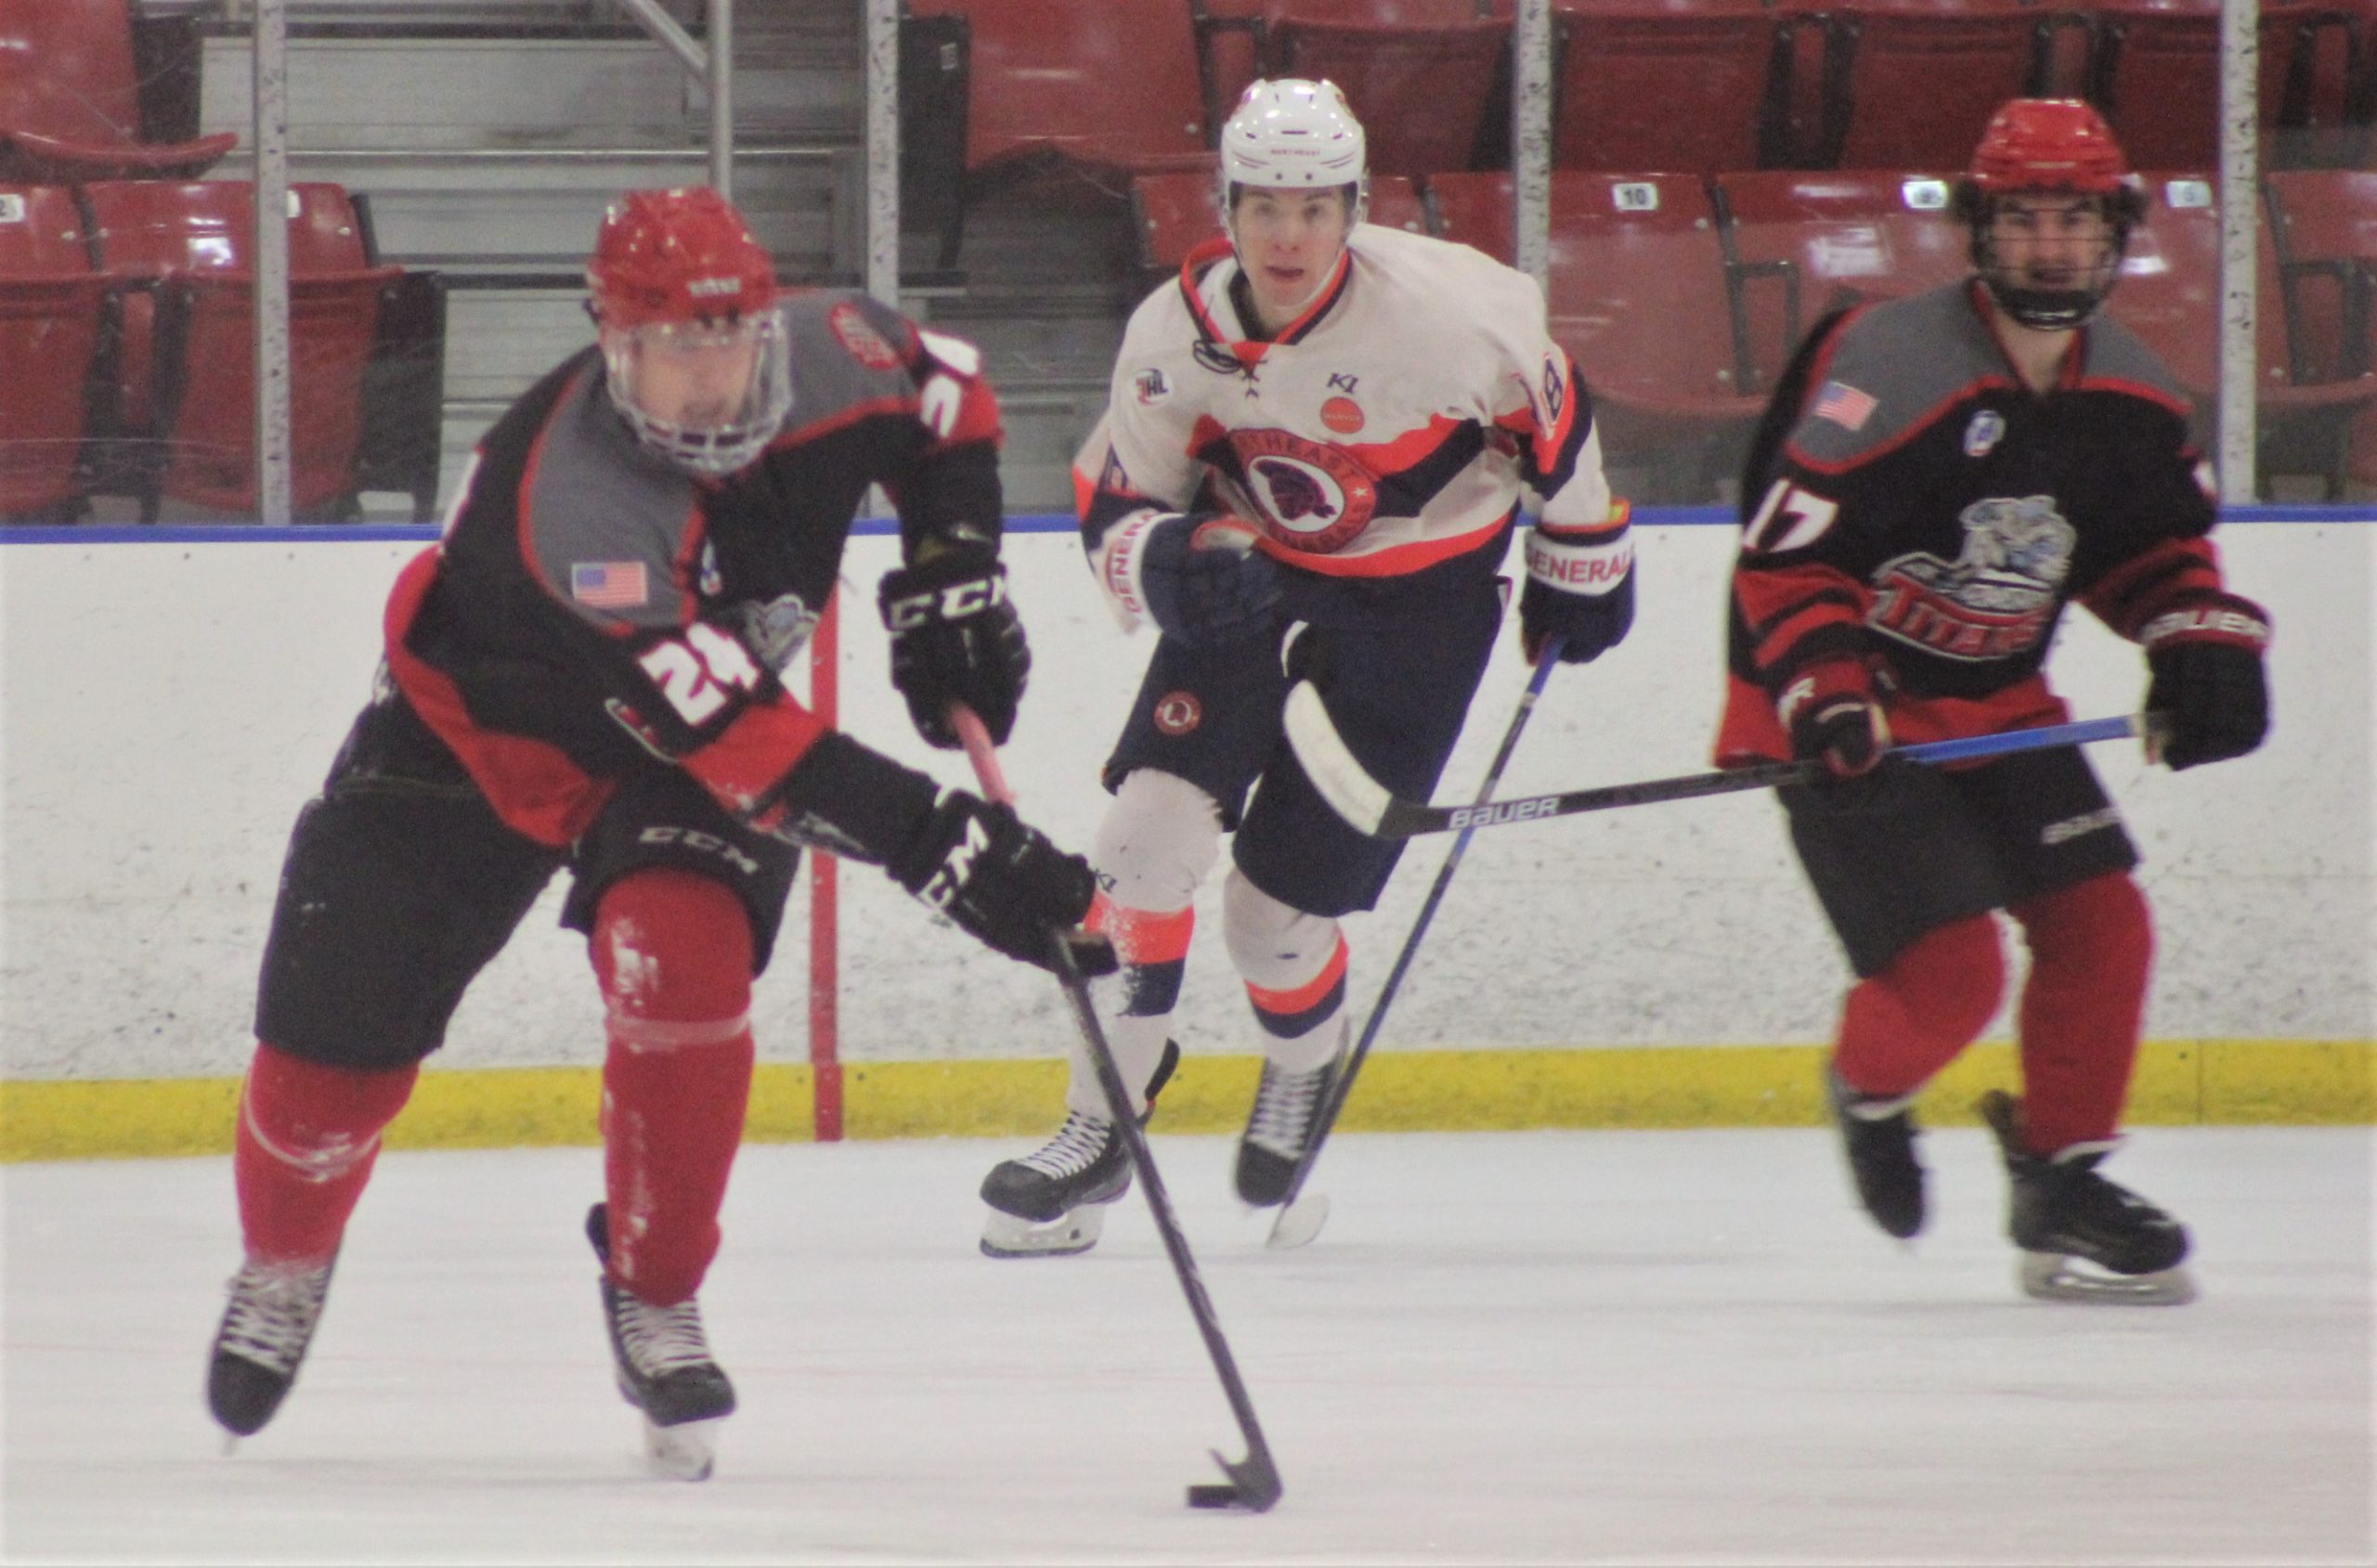 Weekend Preview: 11/6 – 11/7 Titans and Generals finish up 5 game series